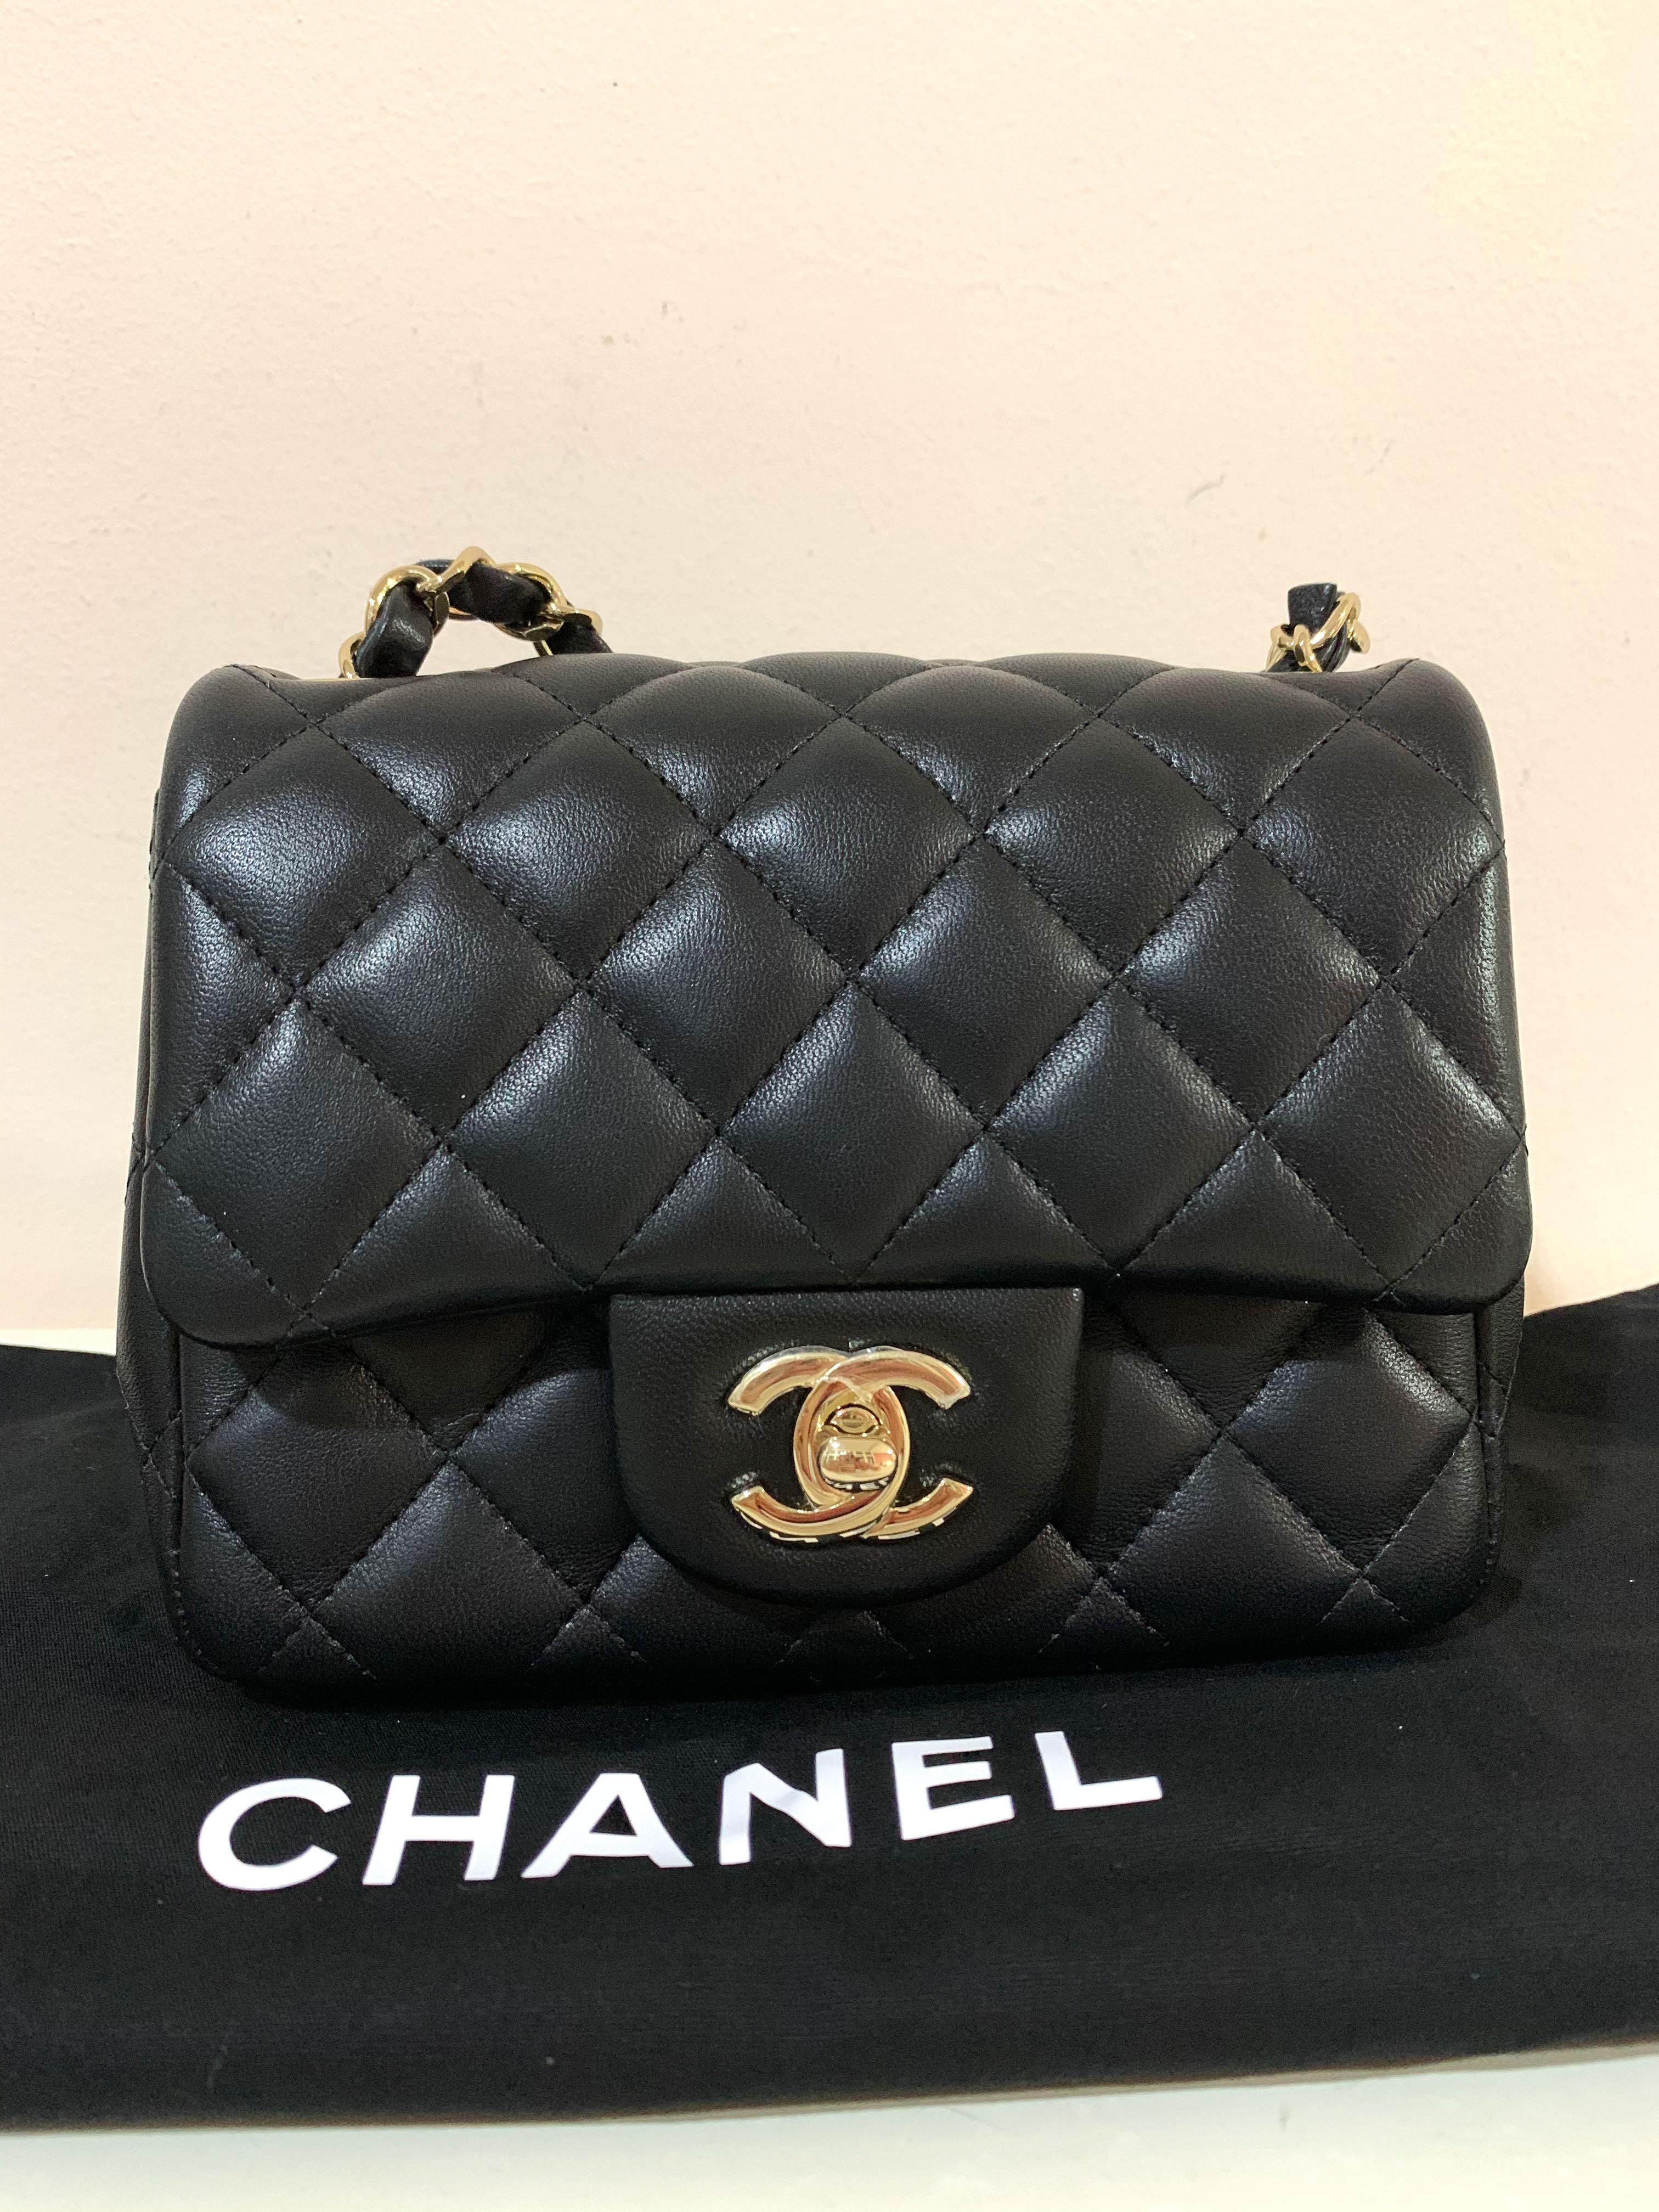 Chanel Mini Flap Bag in Light Gold Hardware, Luxury, Bags